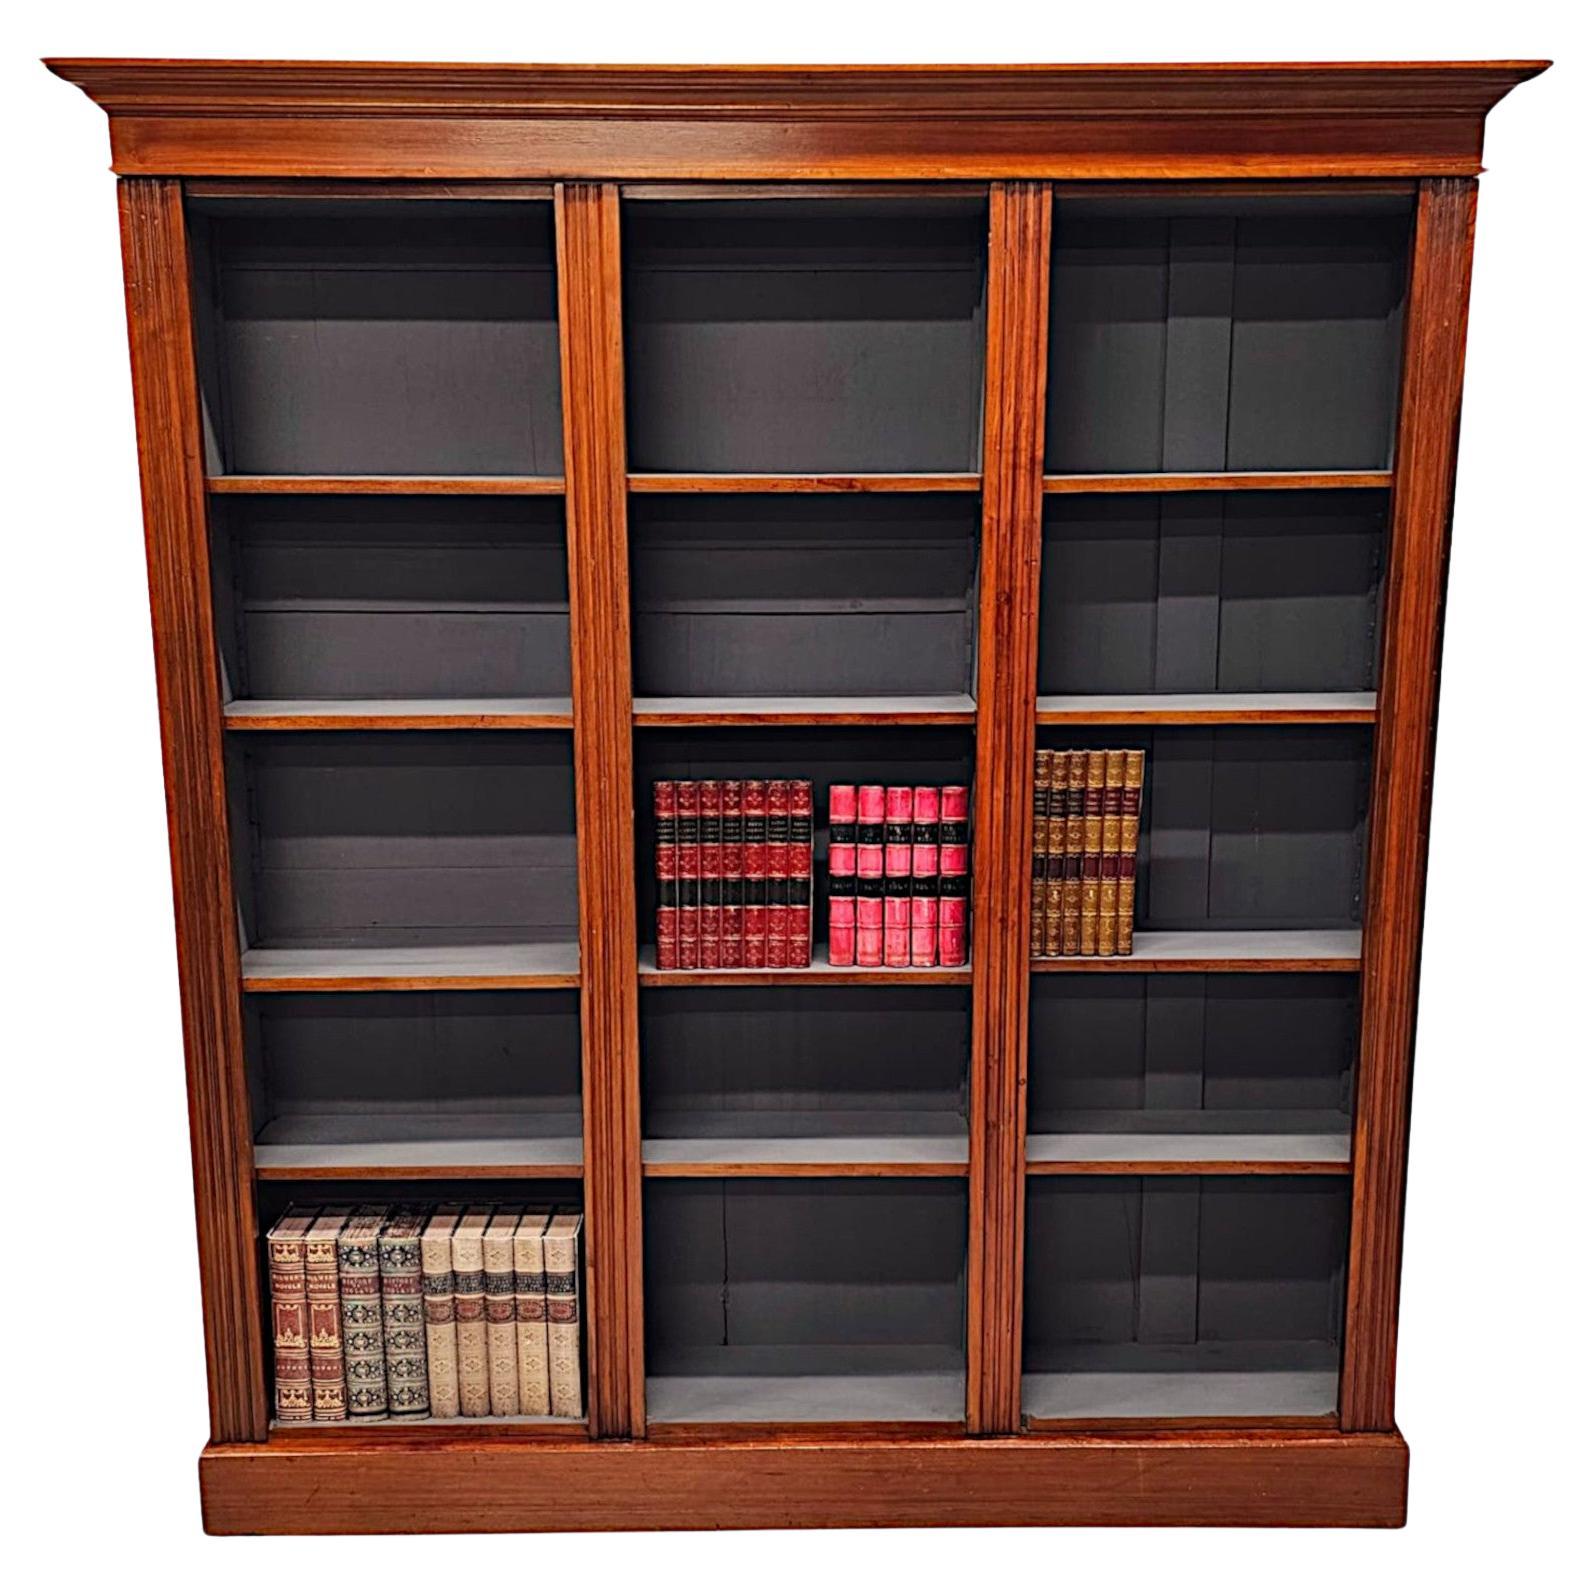 A Very Fine and Unusual Large 19th Century Open Bookcase For Sale